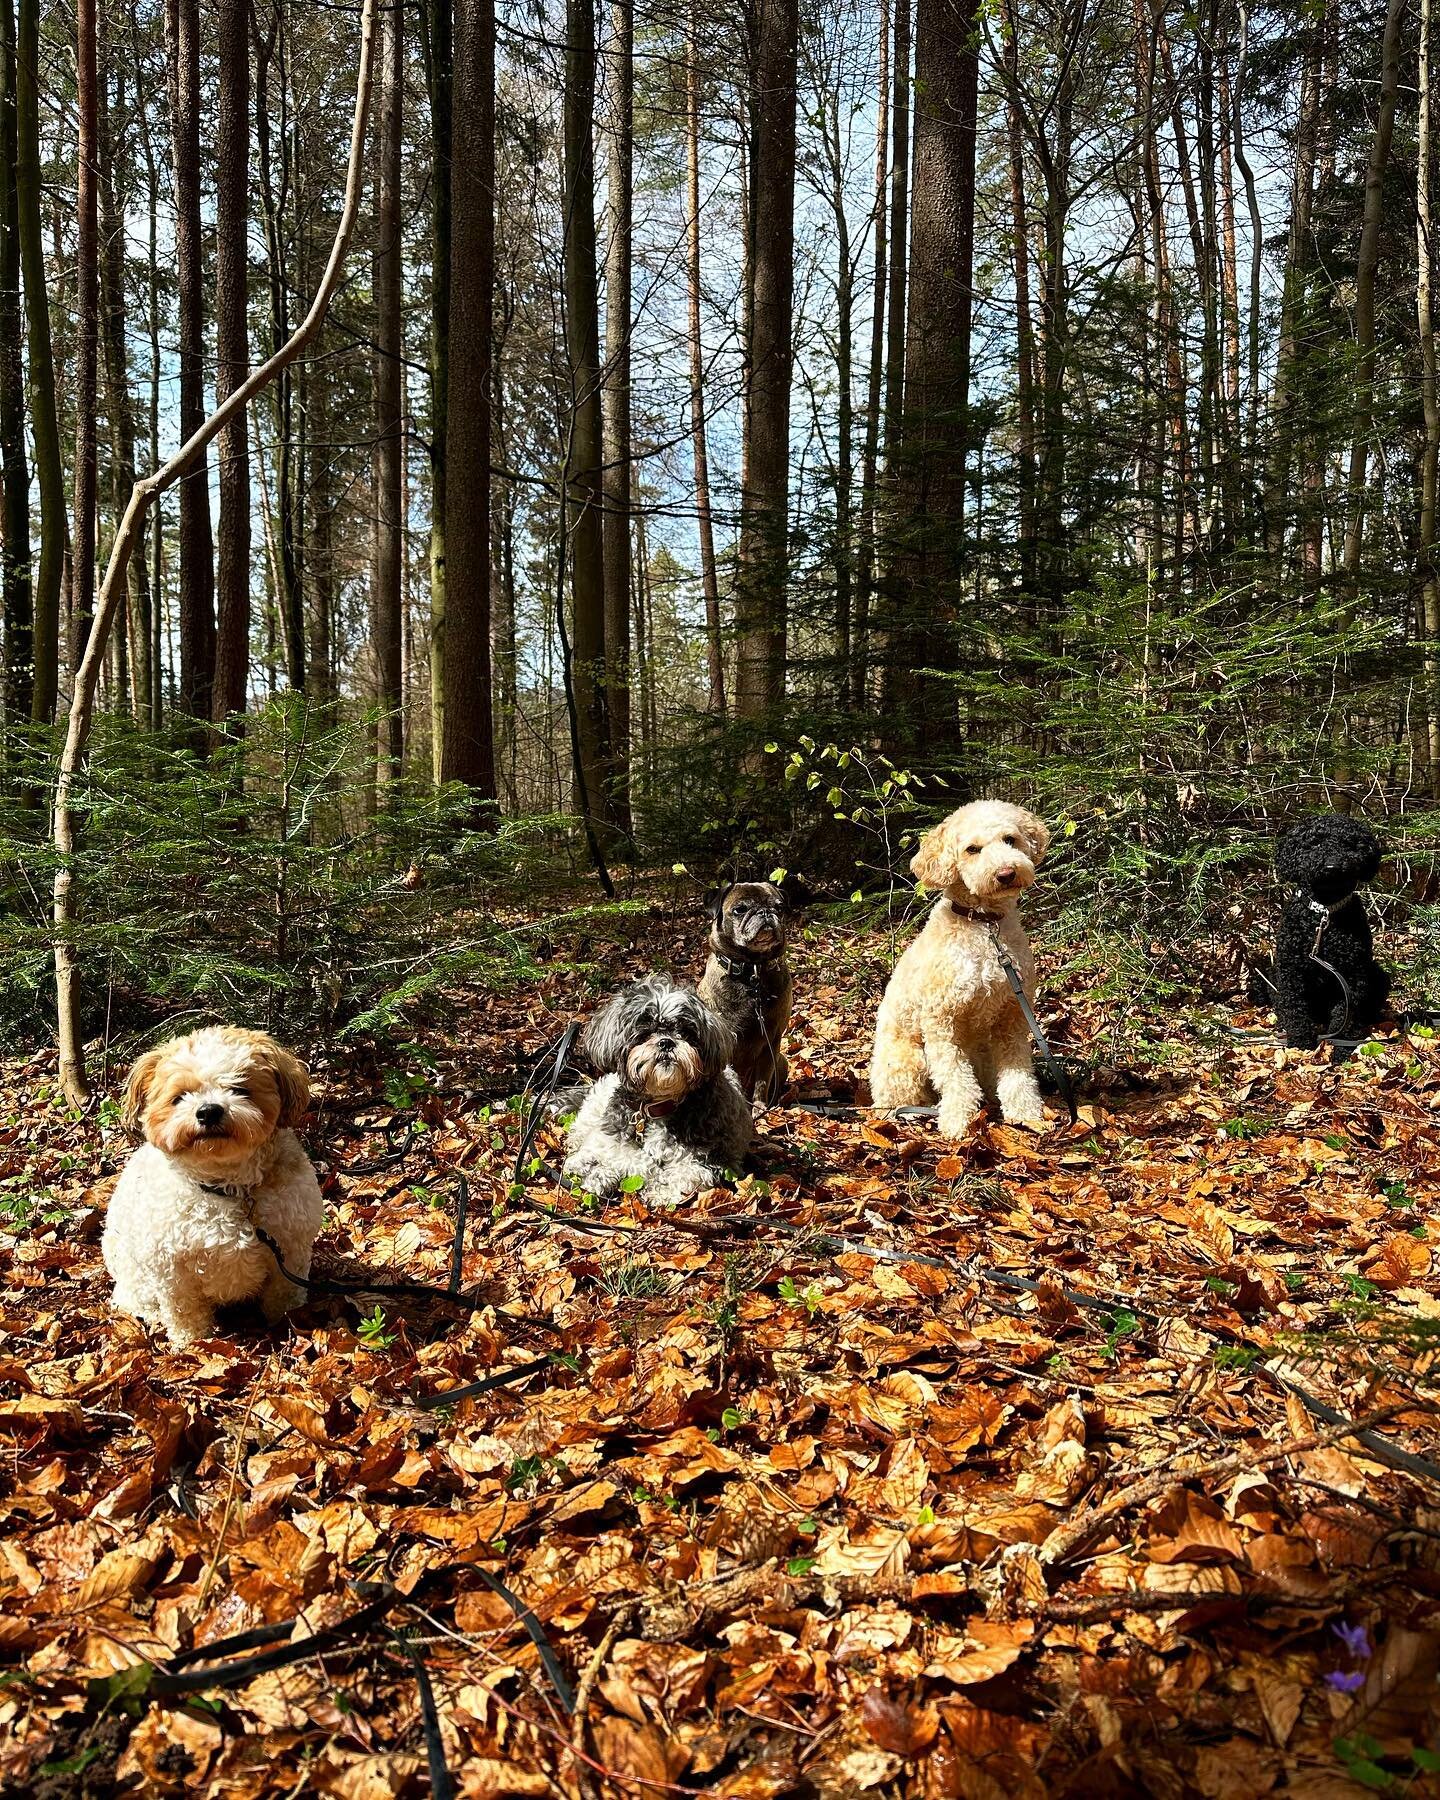 WE WISH YOU A WONDERFUL WEEKEND WITH A LOT OF HAPPY MOMENTS WITH YOUR FURRY BESTIES🐾❤️

#happy #moments #happymoments #dogaffair #fur #furfriends #bestfriends #furry #walk #forest #woods #together #weekend #enjoy #dog #dogs #dogsofzurich #dogsofinst